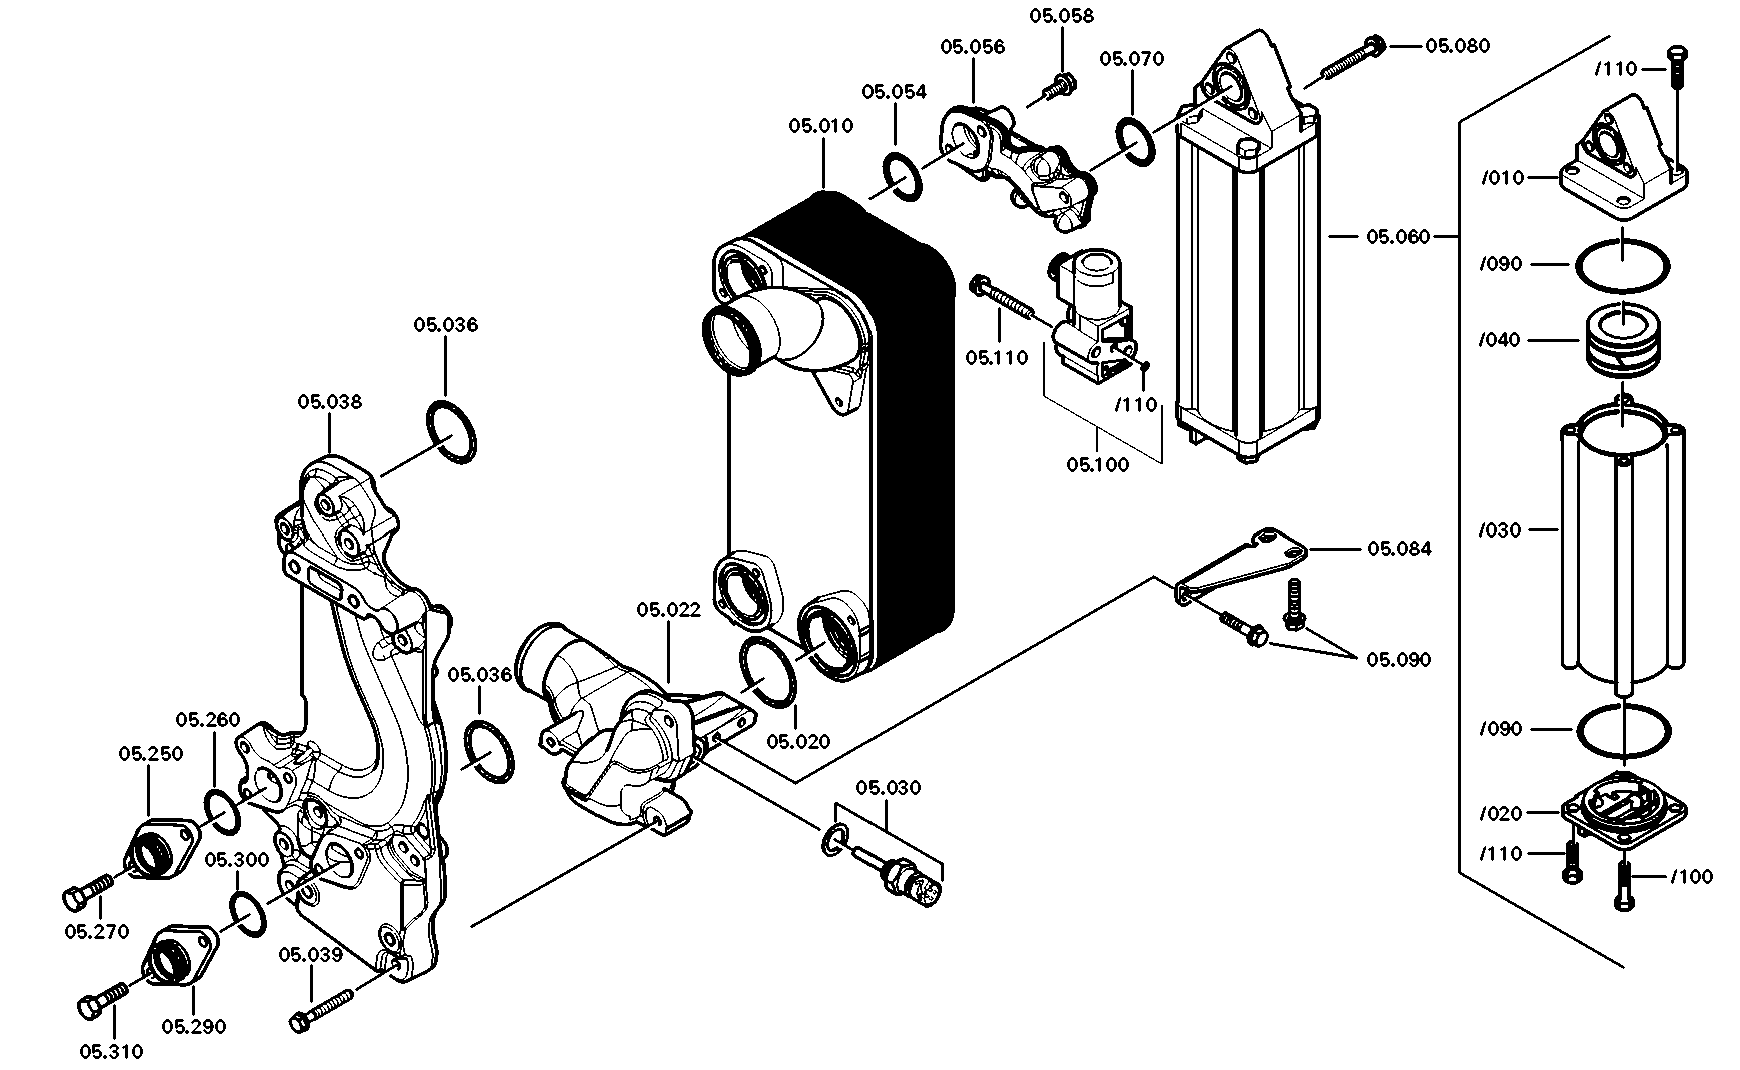 drawing for HUN2001 GMBH 500054118 - CONNECTING HOUSING (figure 3)